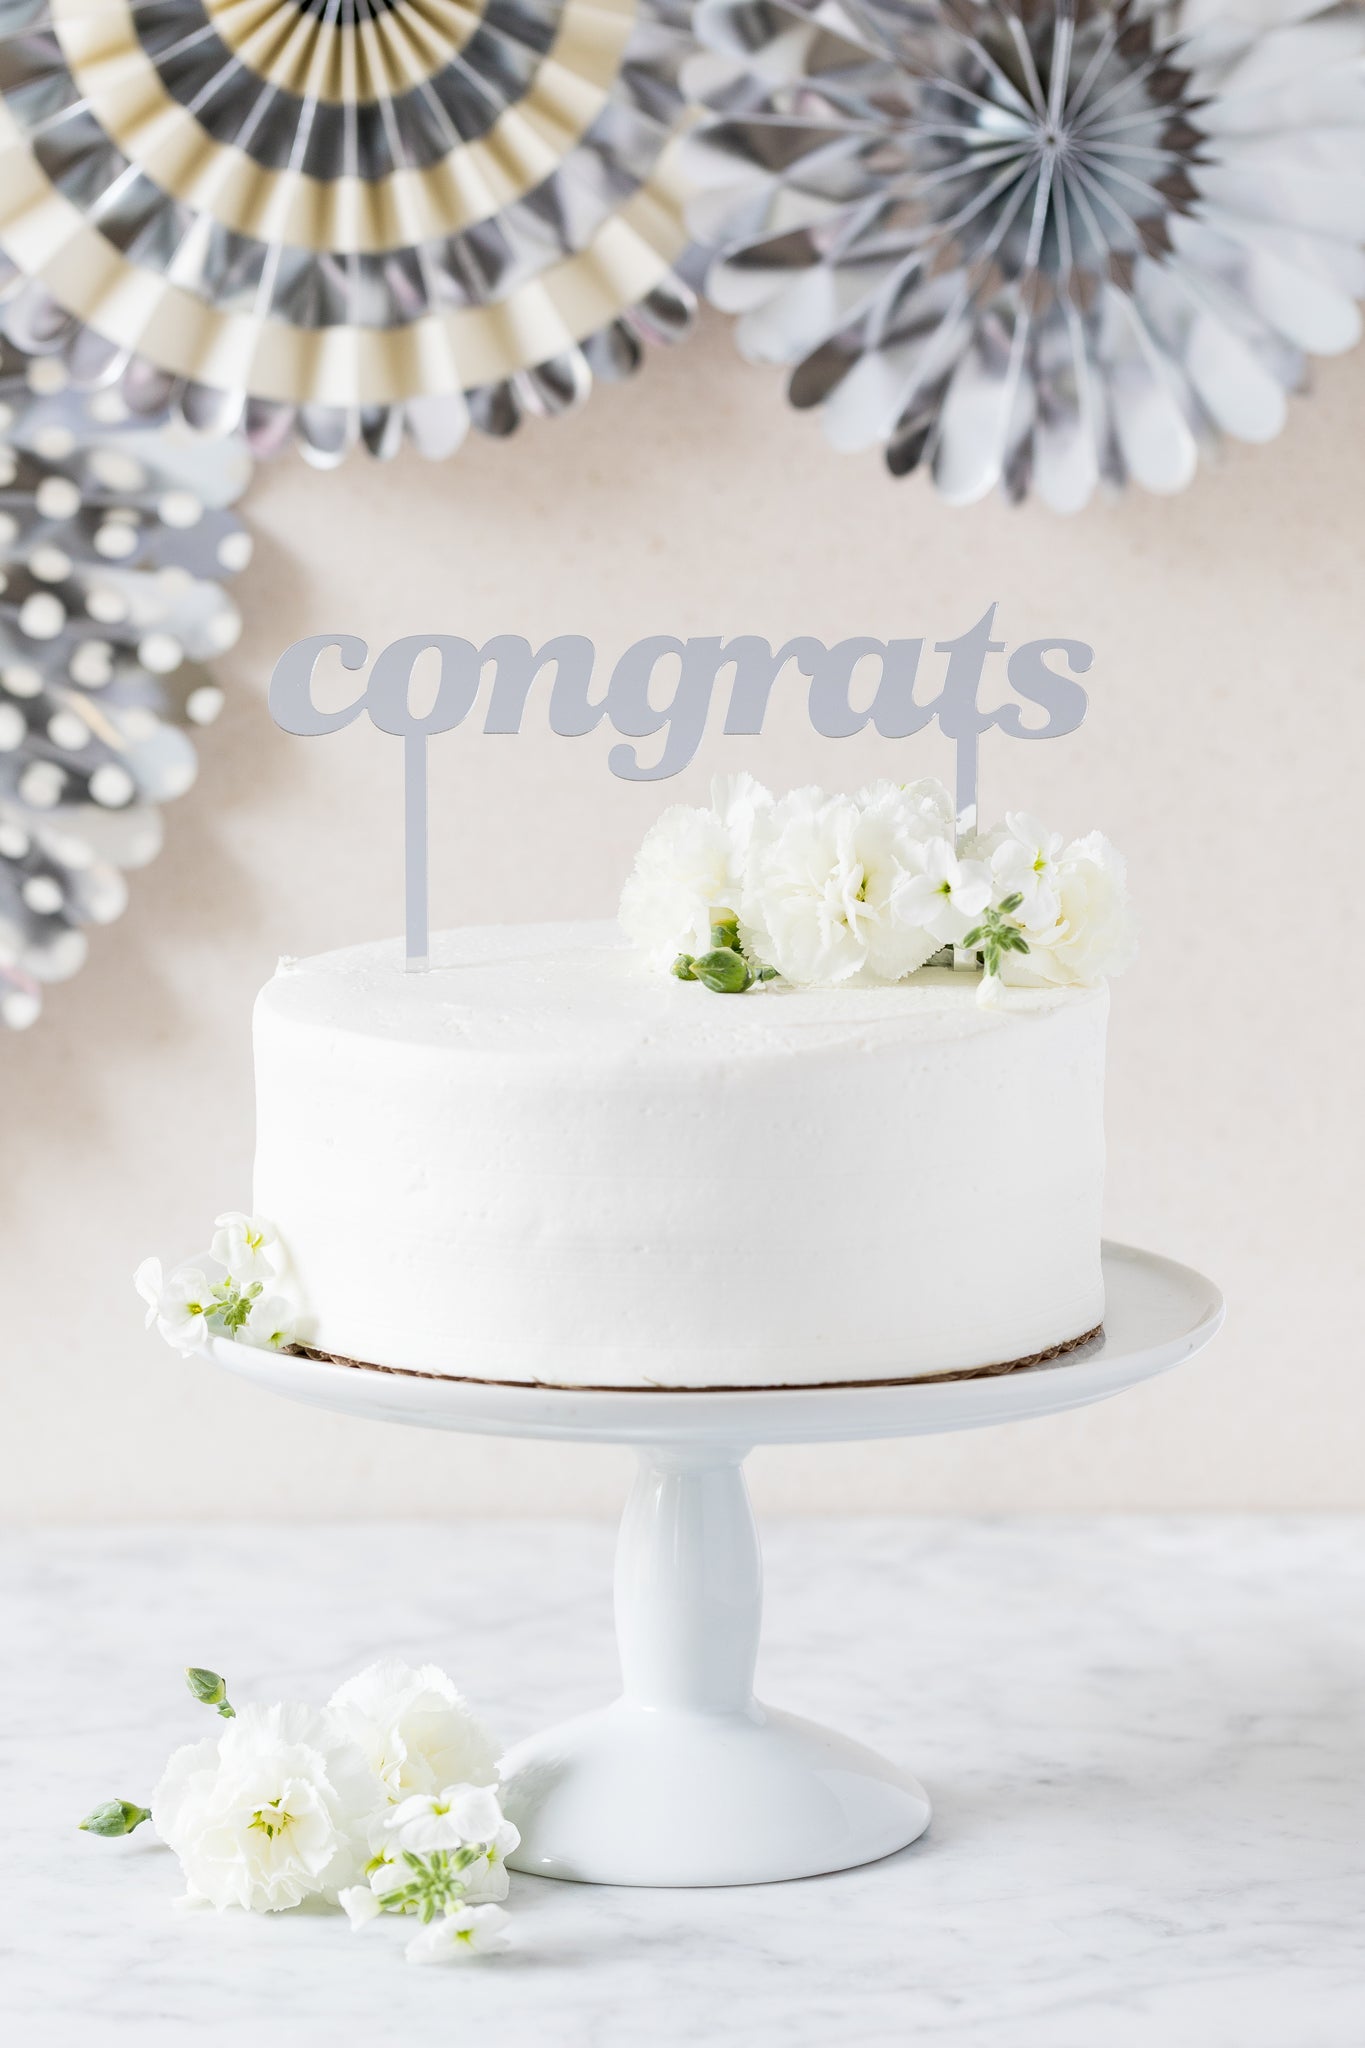 Congrats Cake Topper - Silver - My Mind's Eye Paper Goods